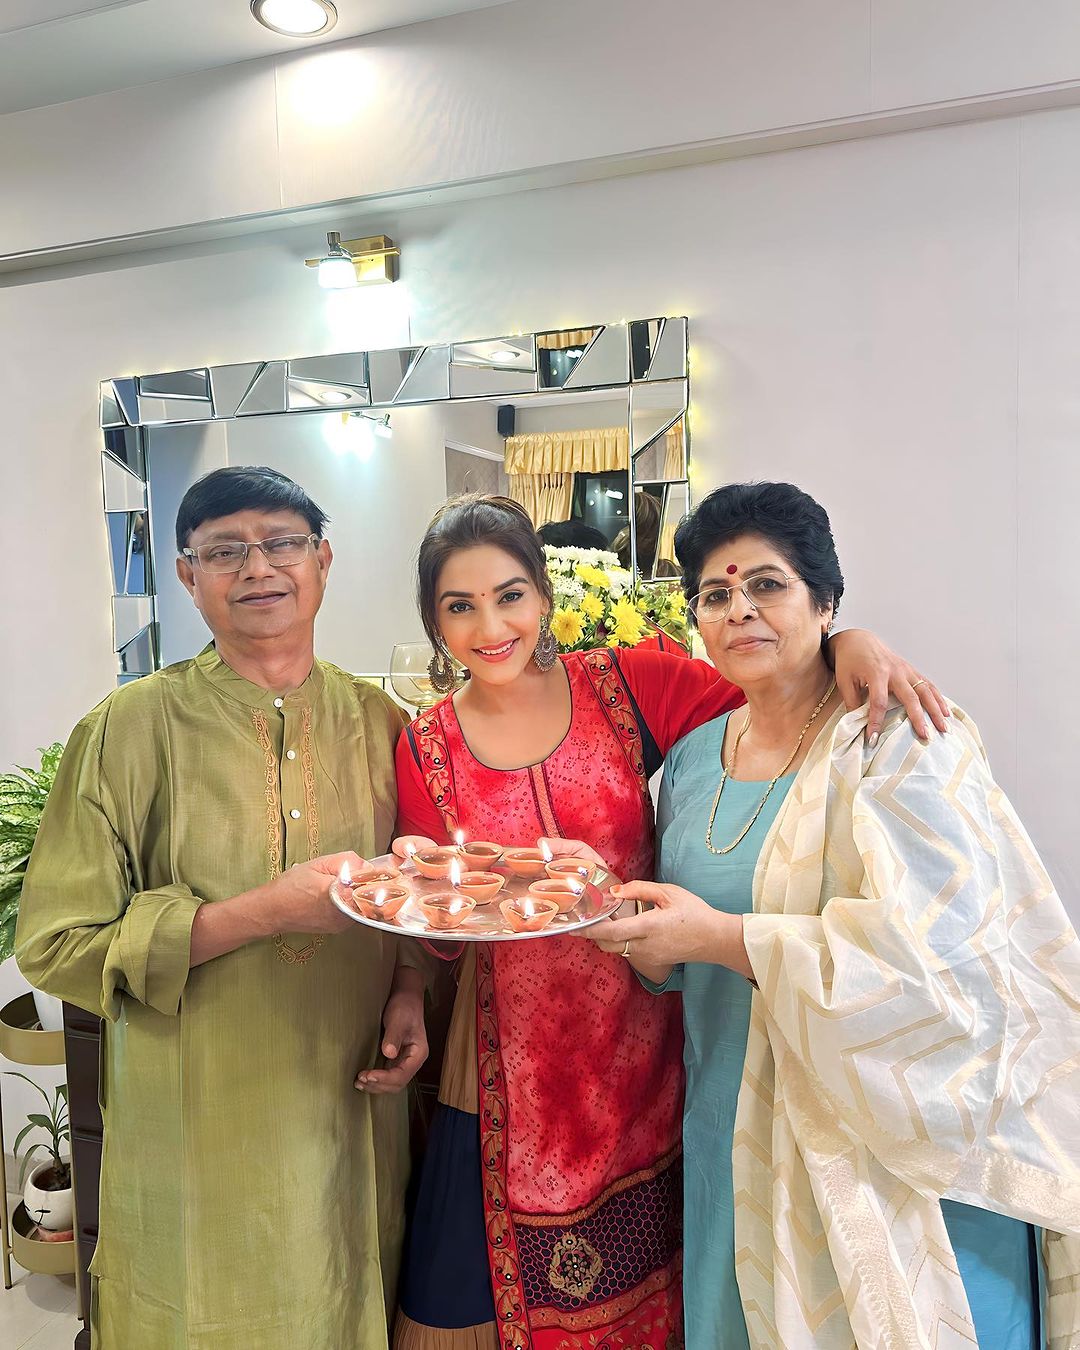 Exclusive: Actress Rati Pandey Celebrates Chhath Puja With Her Family Who Shared The Significance Of The Festival